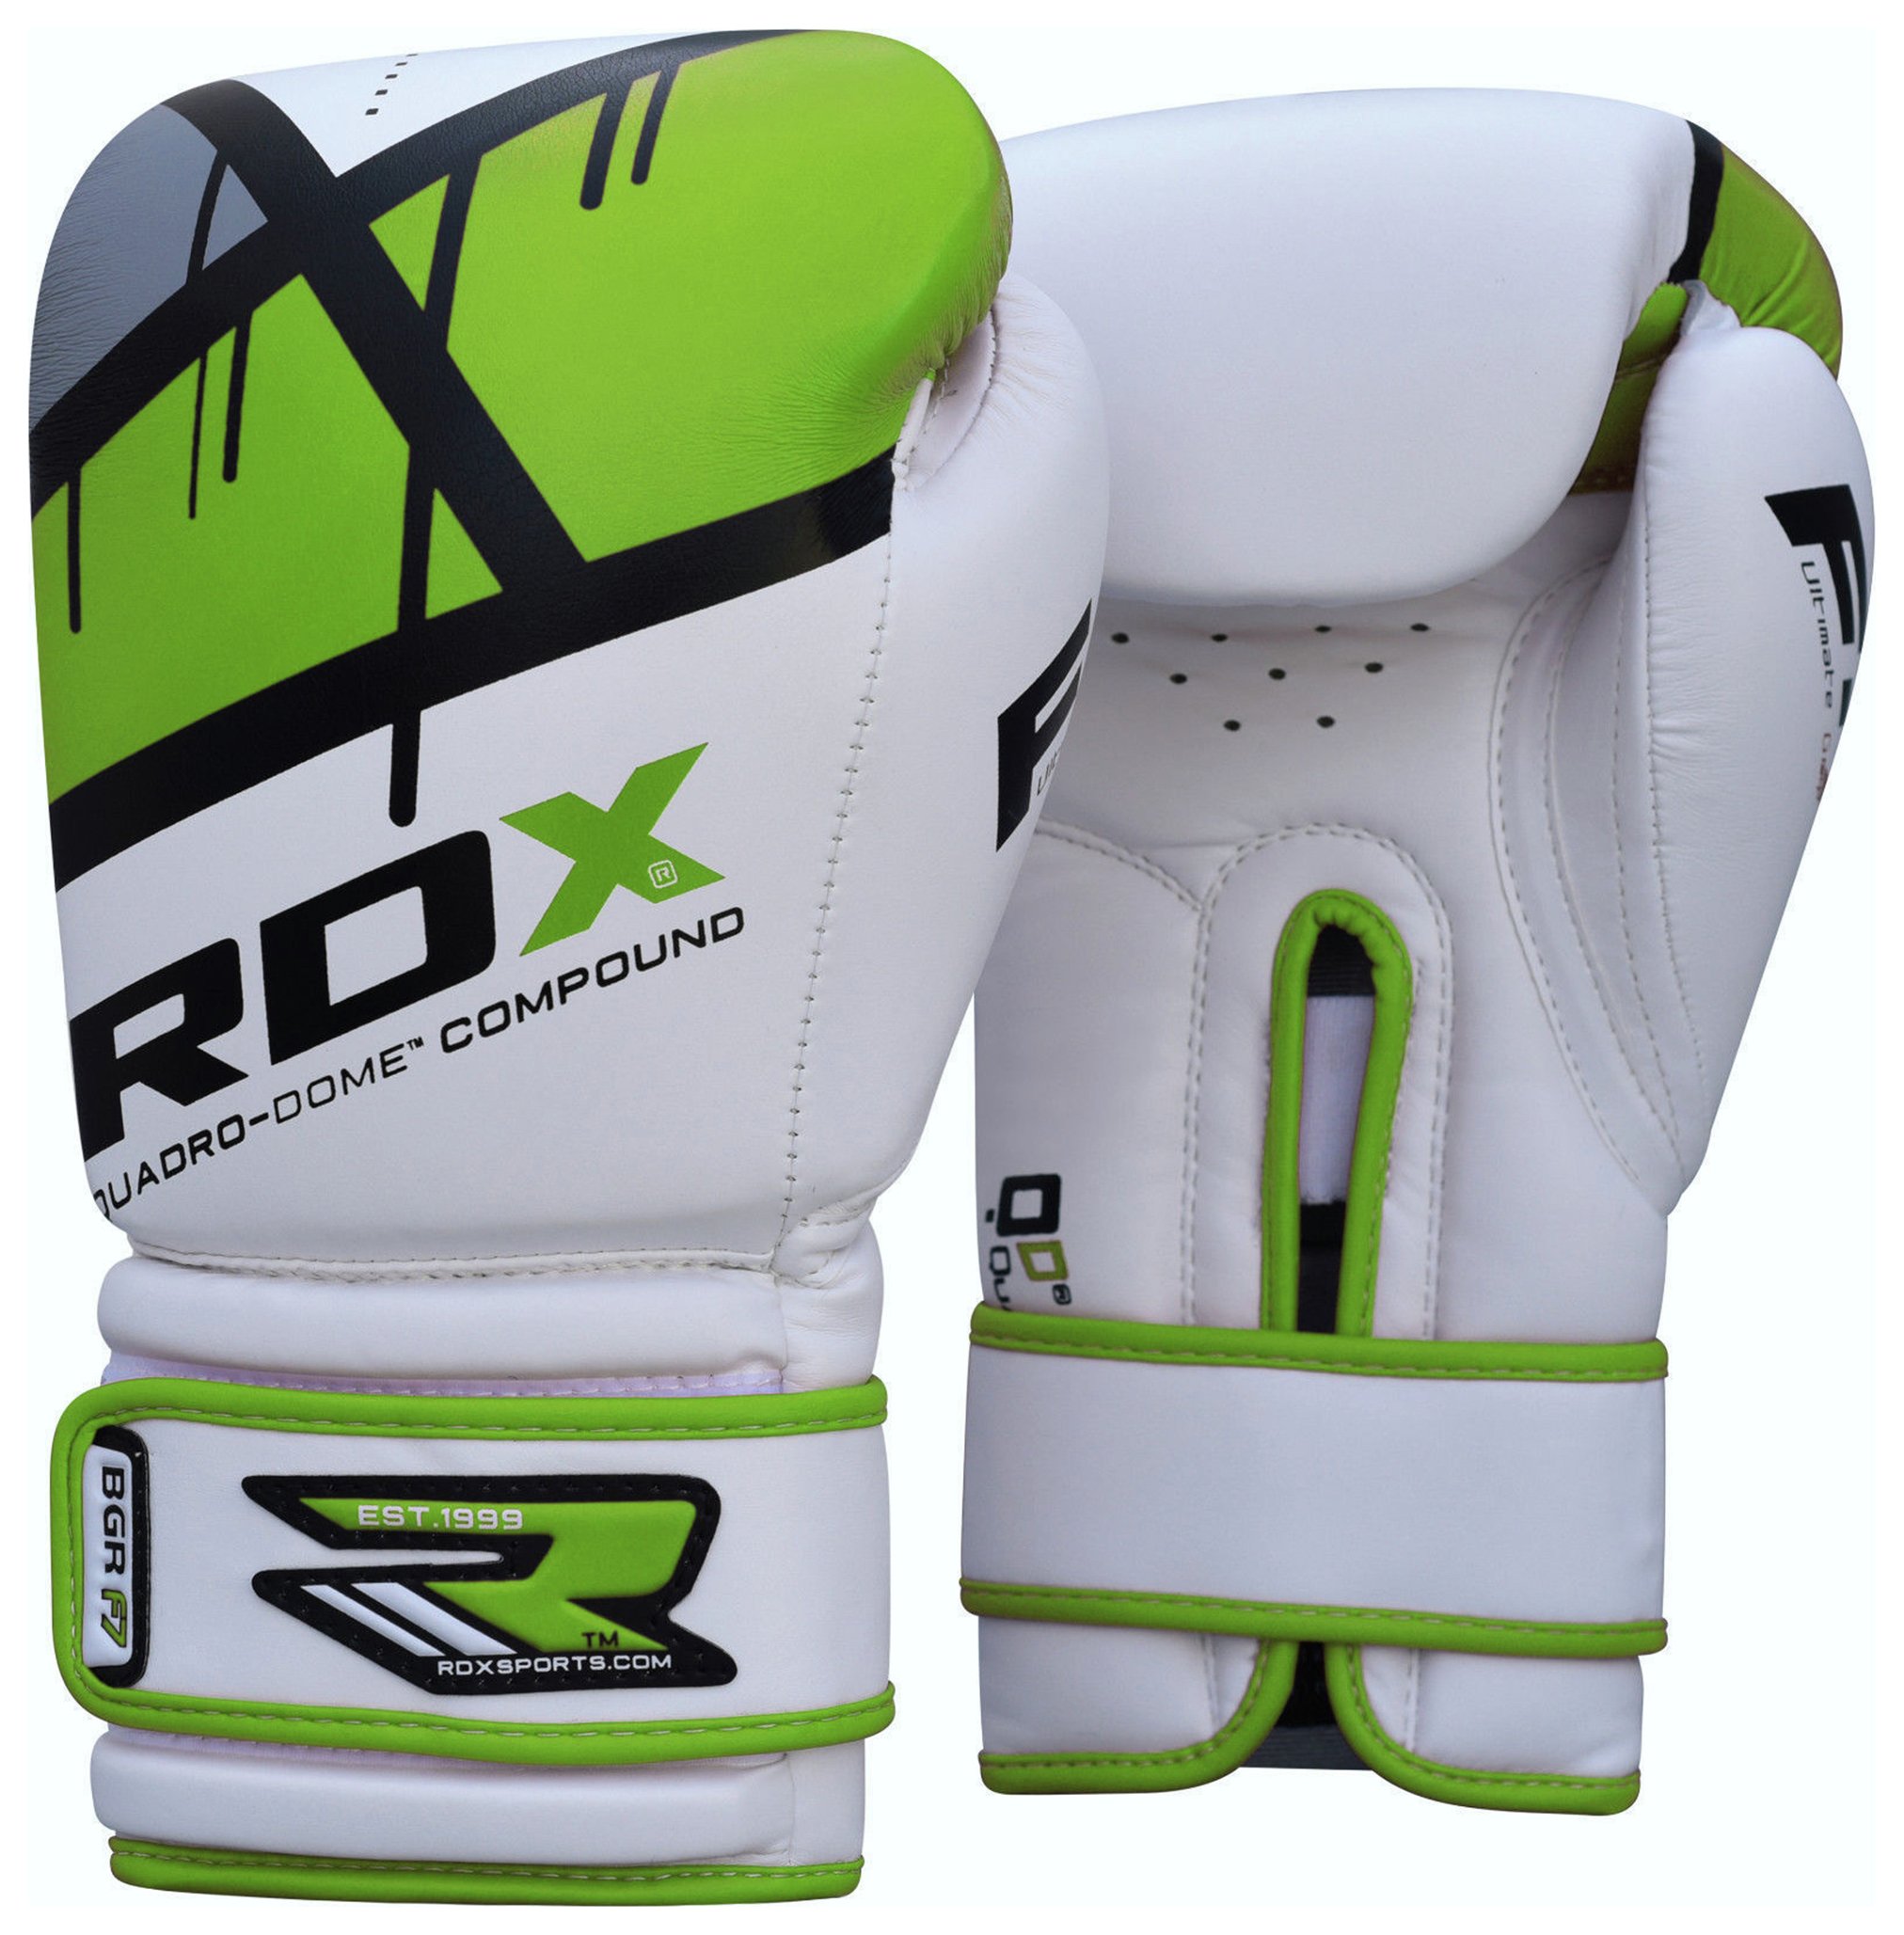 RDX Synthetic 14oz Leather Boxing Gloves - Green